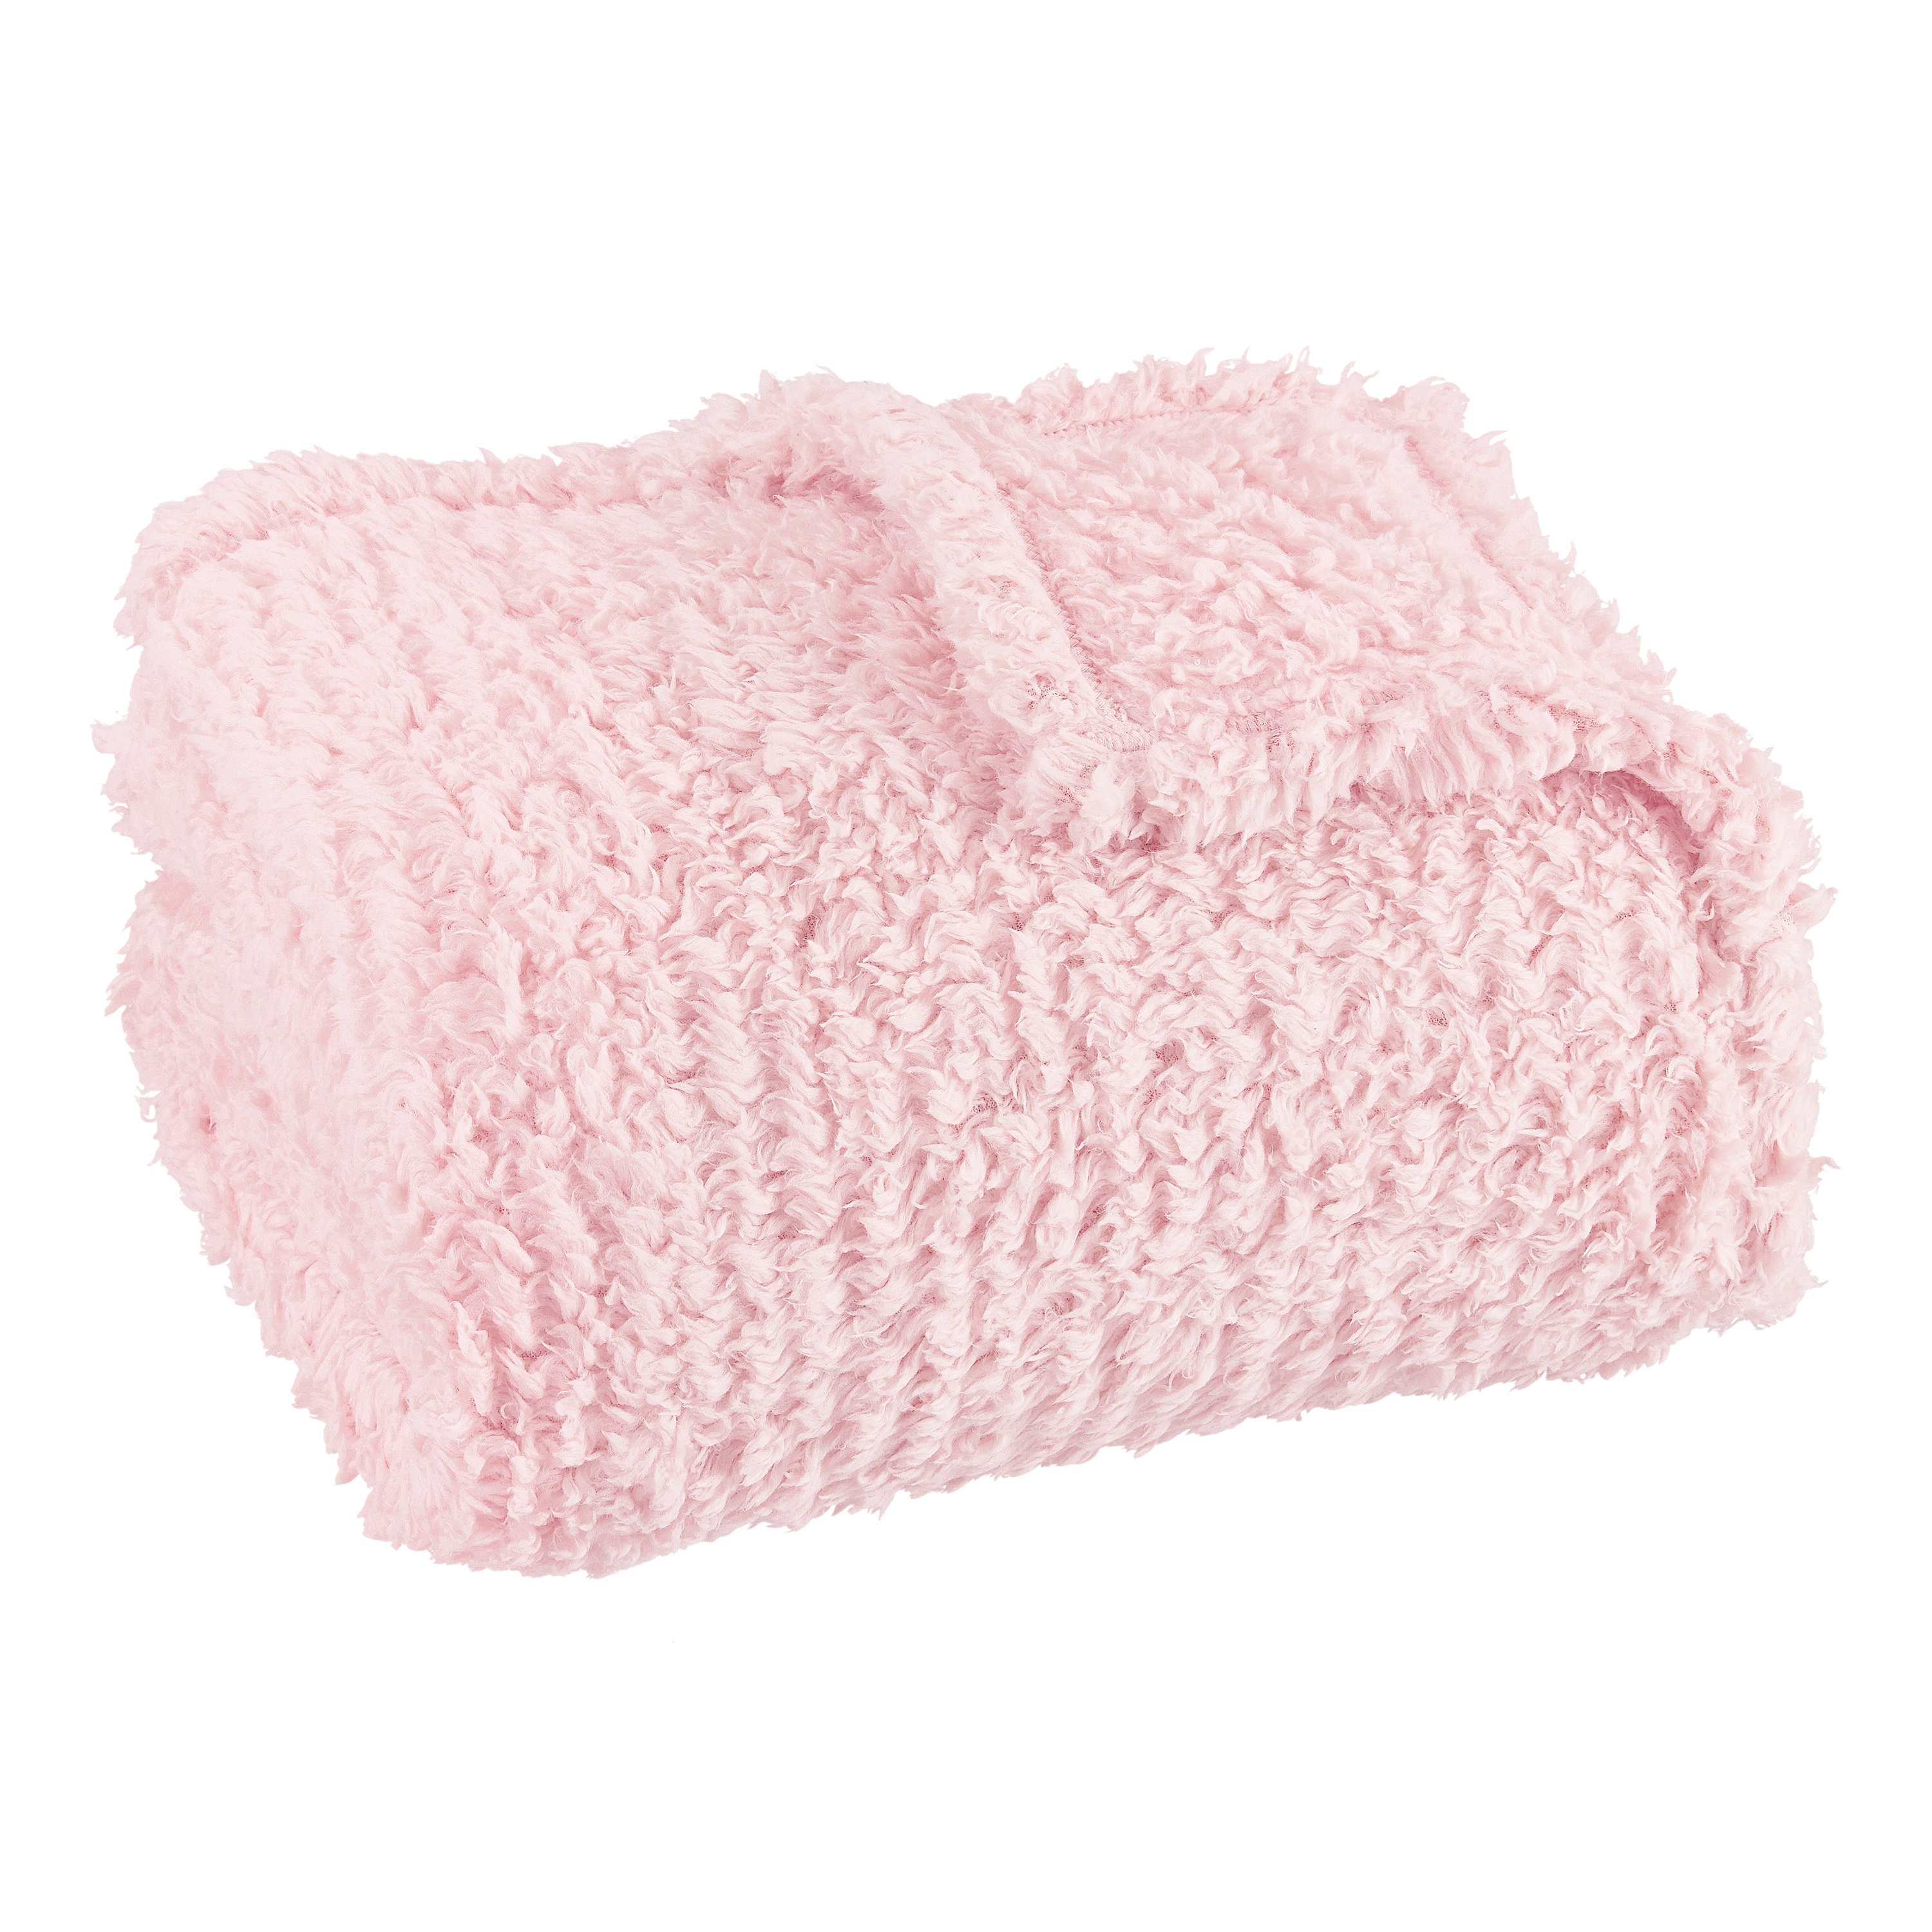 Mainstays Sherpa Throw Blanket, 50" X 60", Light Pink - image 3 of 5